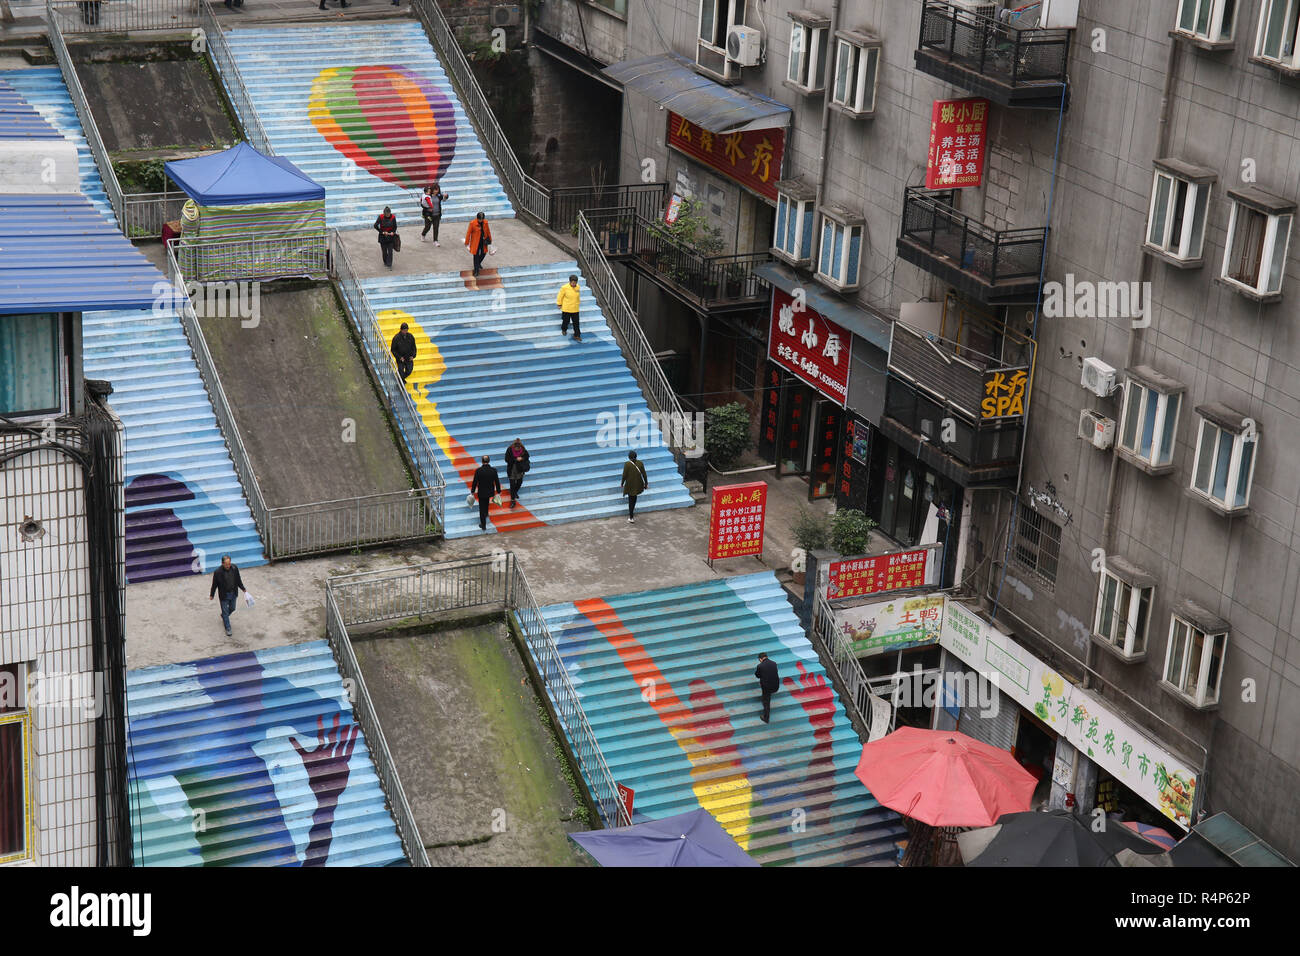 Chongqing, Chongqing, China. 28th Nov, 2018. Chongqing, CHINA-The painted  stairs in southwest ChinaÃ¢â‚¬â„¢s Chongqing. Credit: SIPA Asia/ZUMA  Wire/Alamy Live News Stock Photo - Alamy